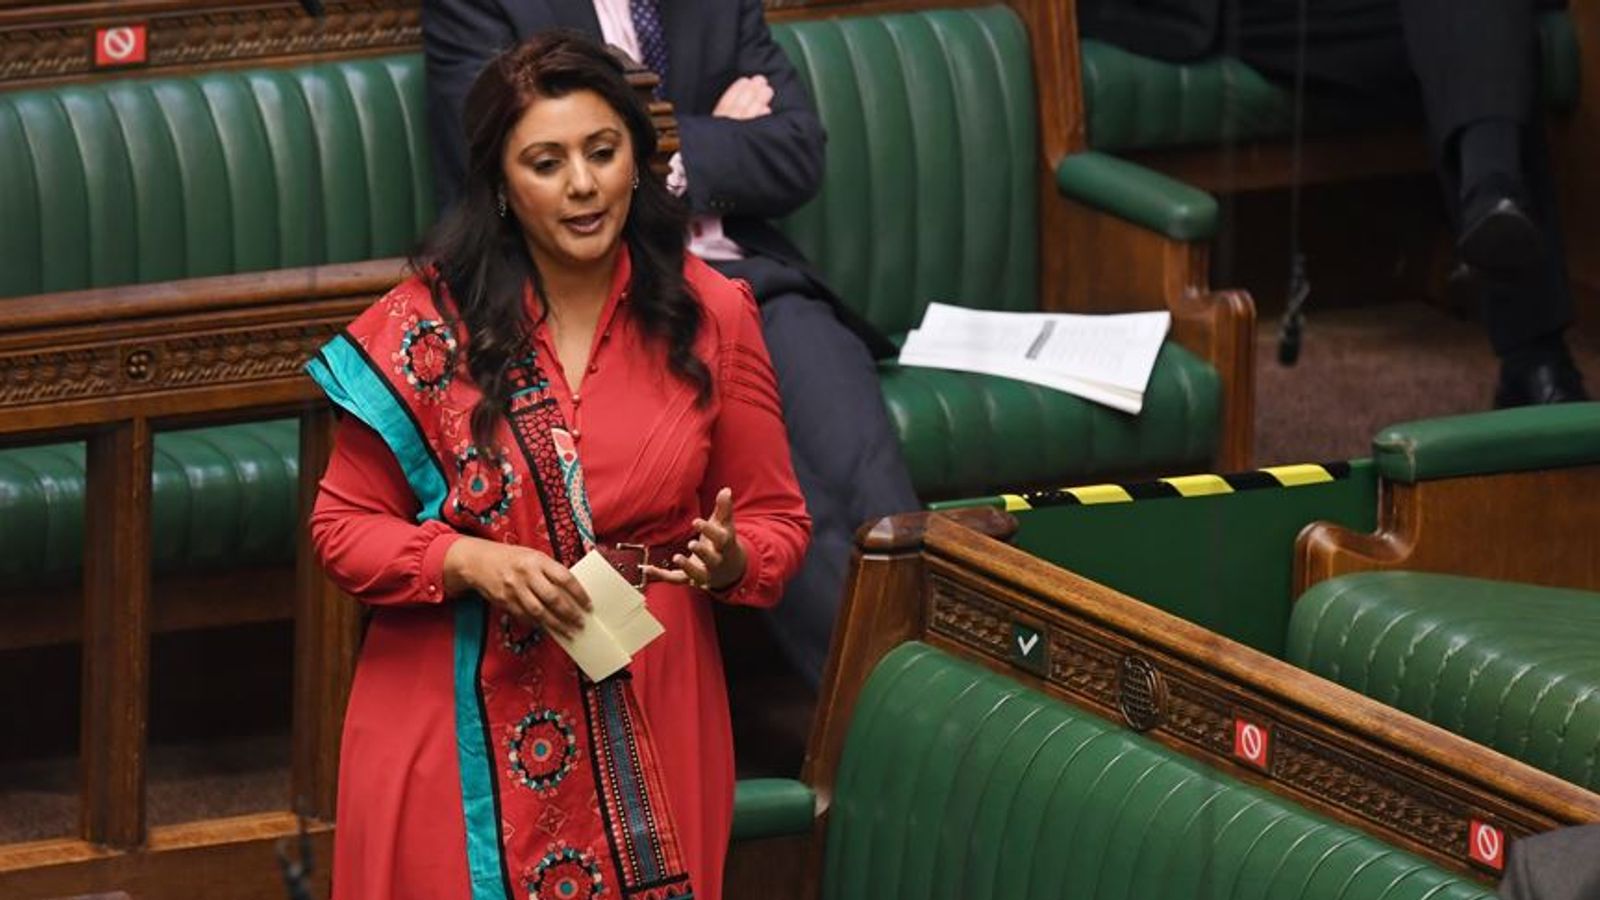 Nusrat Ghani: Investigation launched into MP’s claim she was sacked as a minister due to her Muslim faith